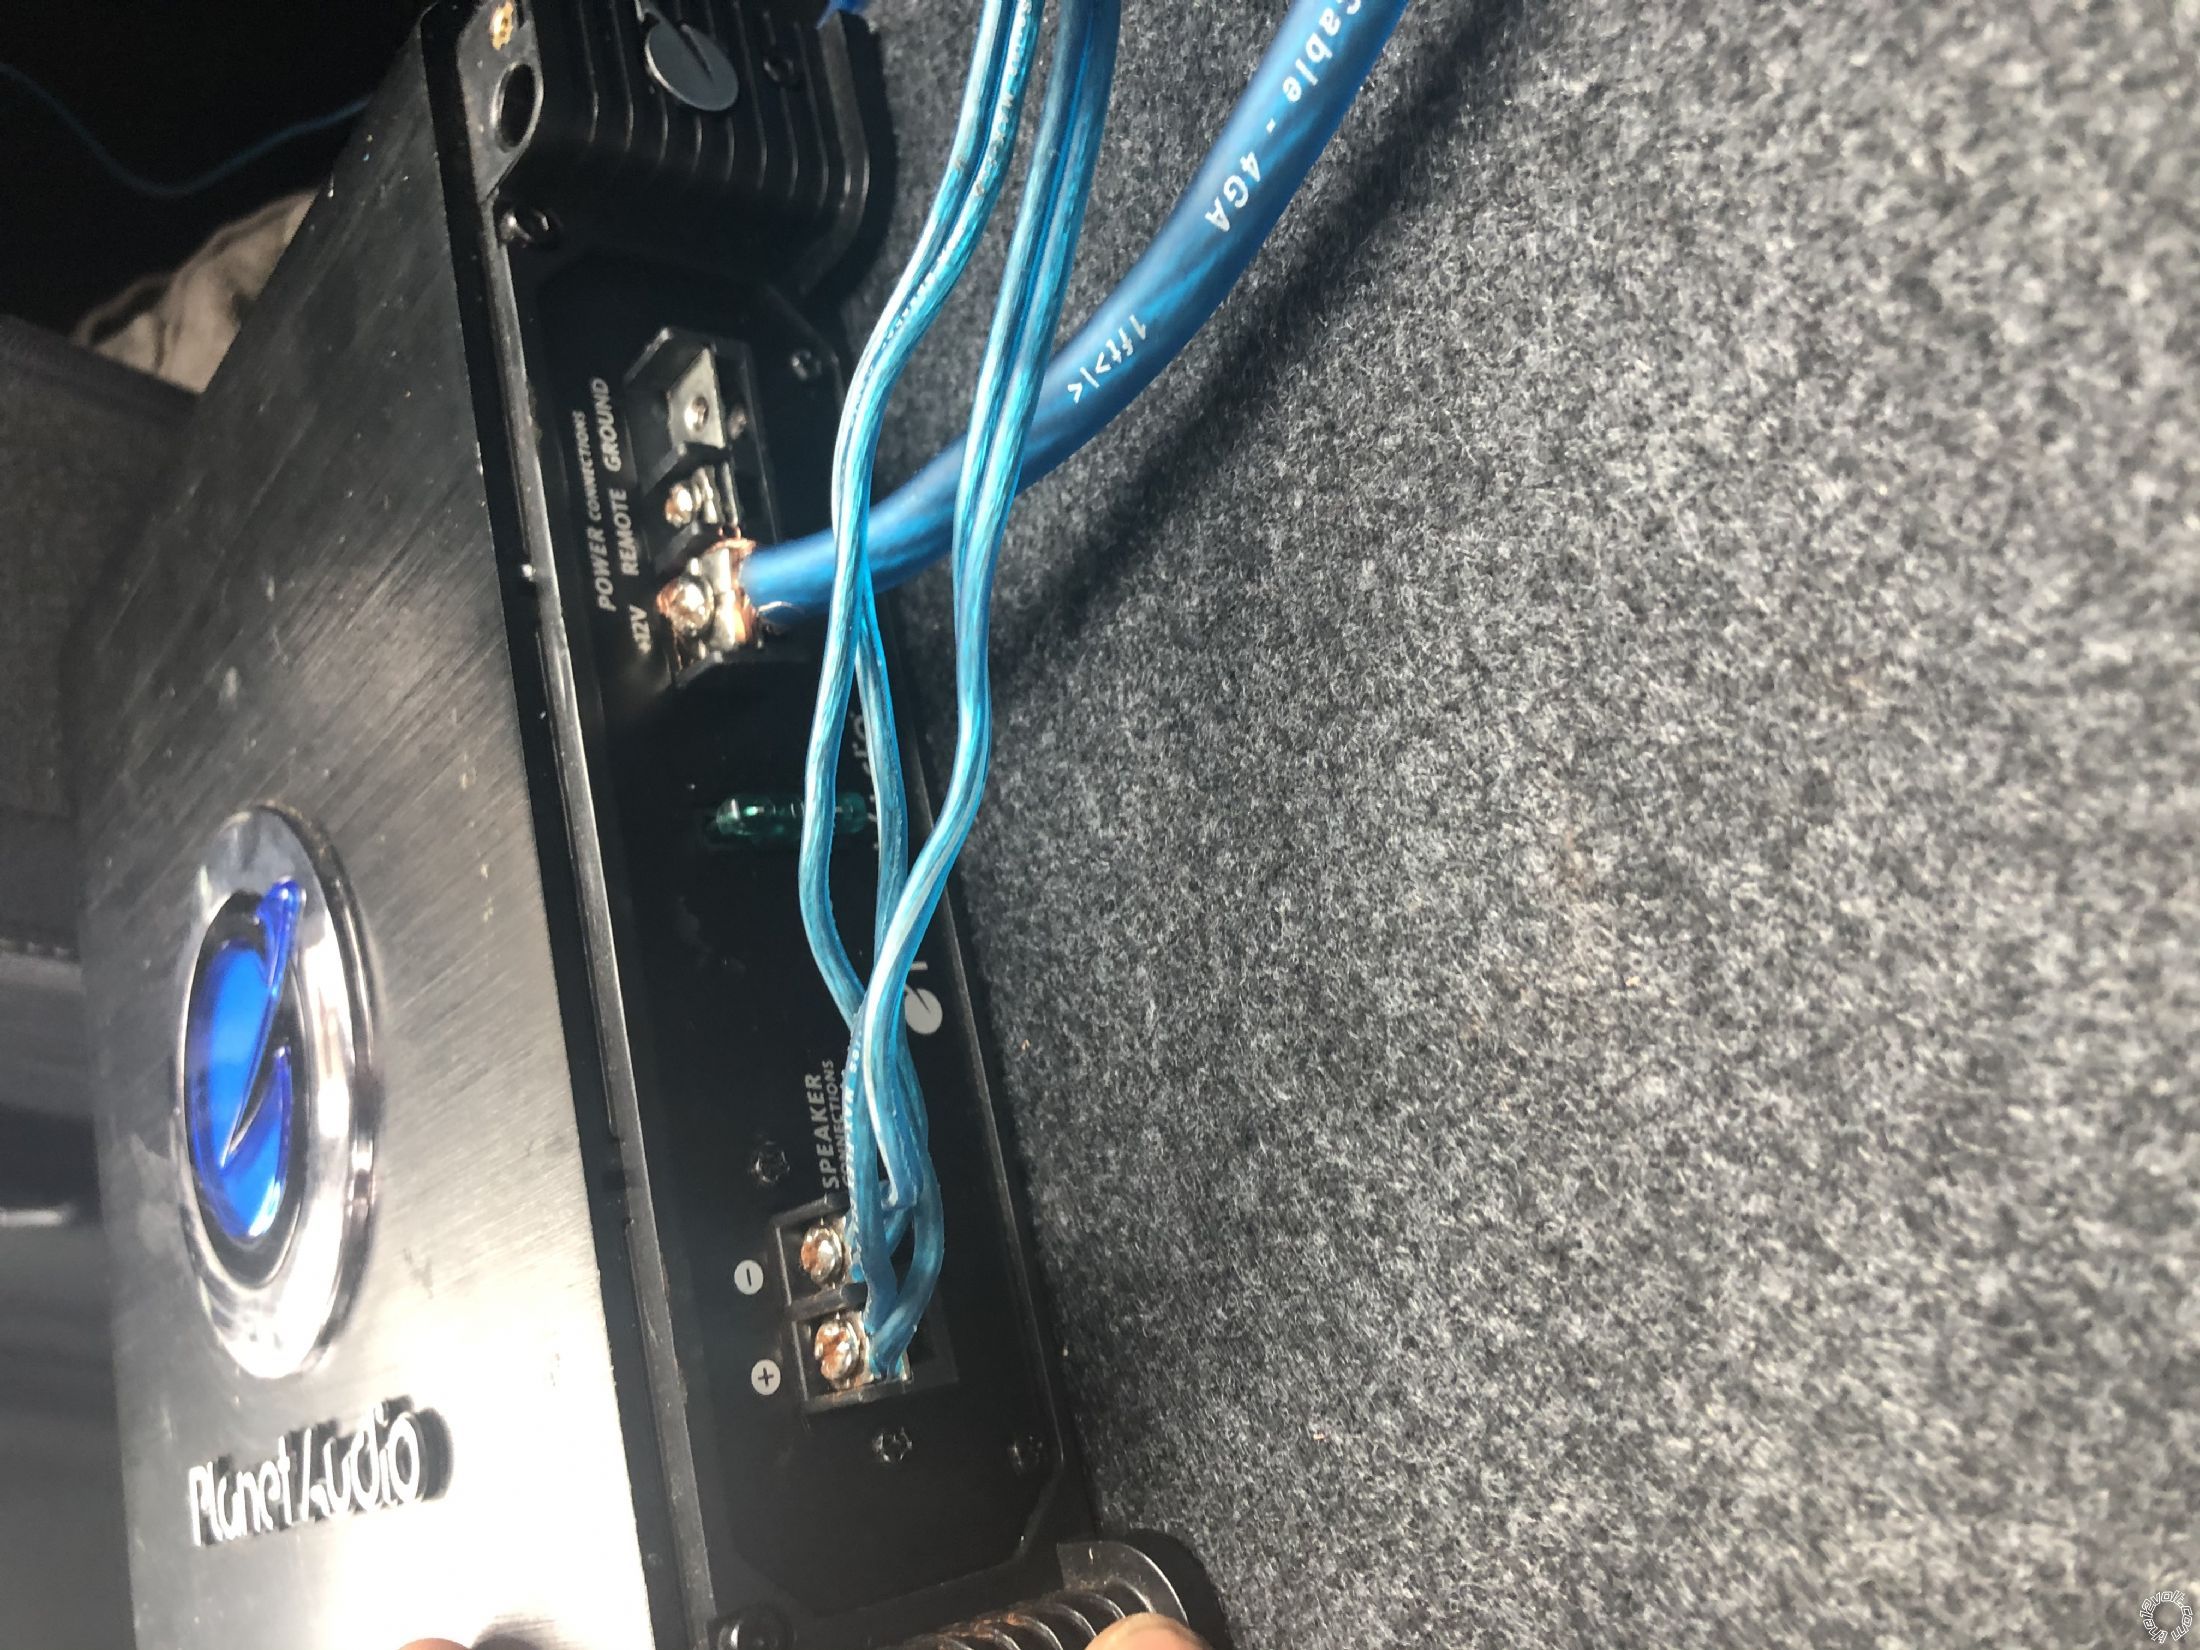 Where to Connect Output Converter for Subs, 2018 Nissan Sentra -- posted image.